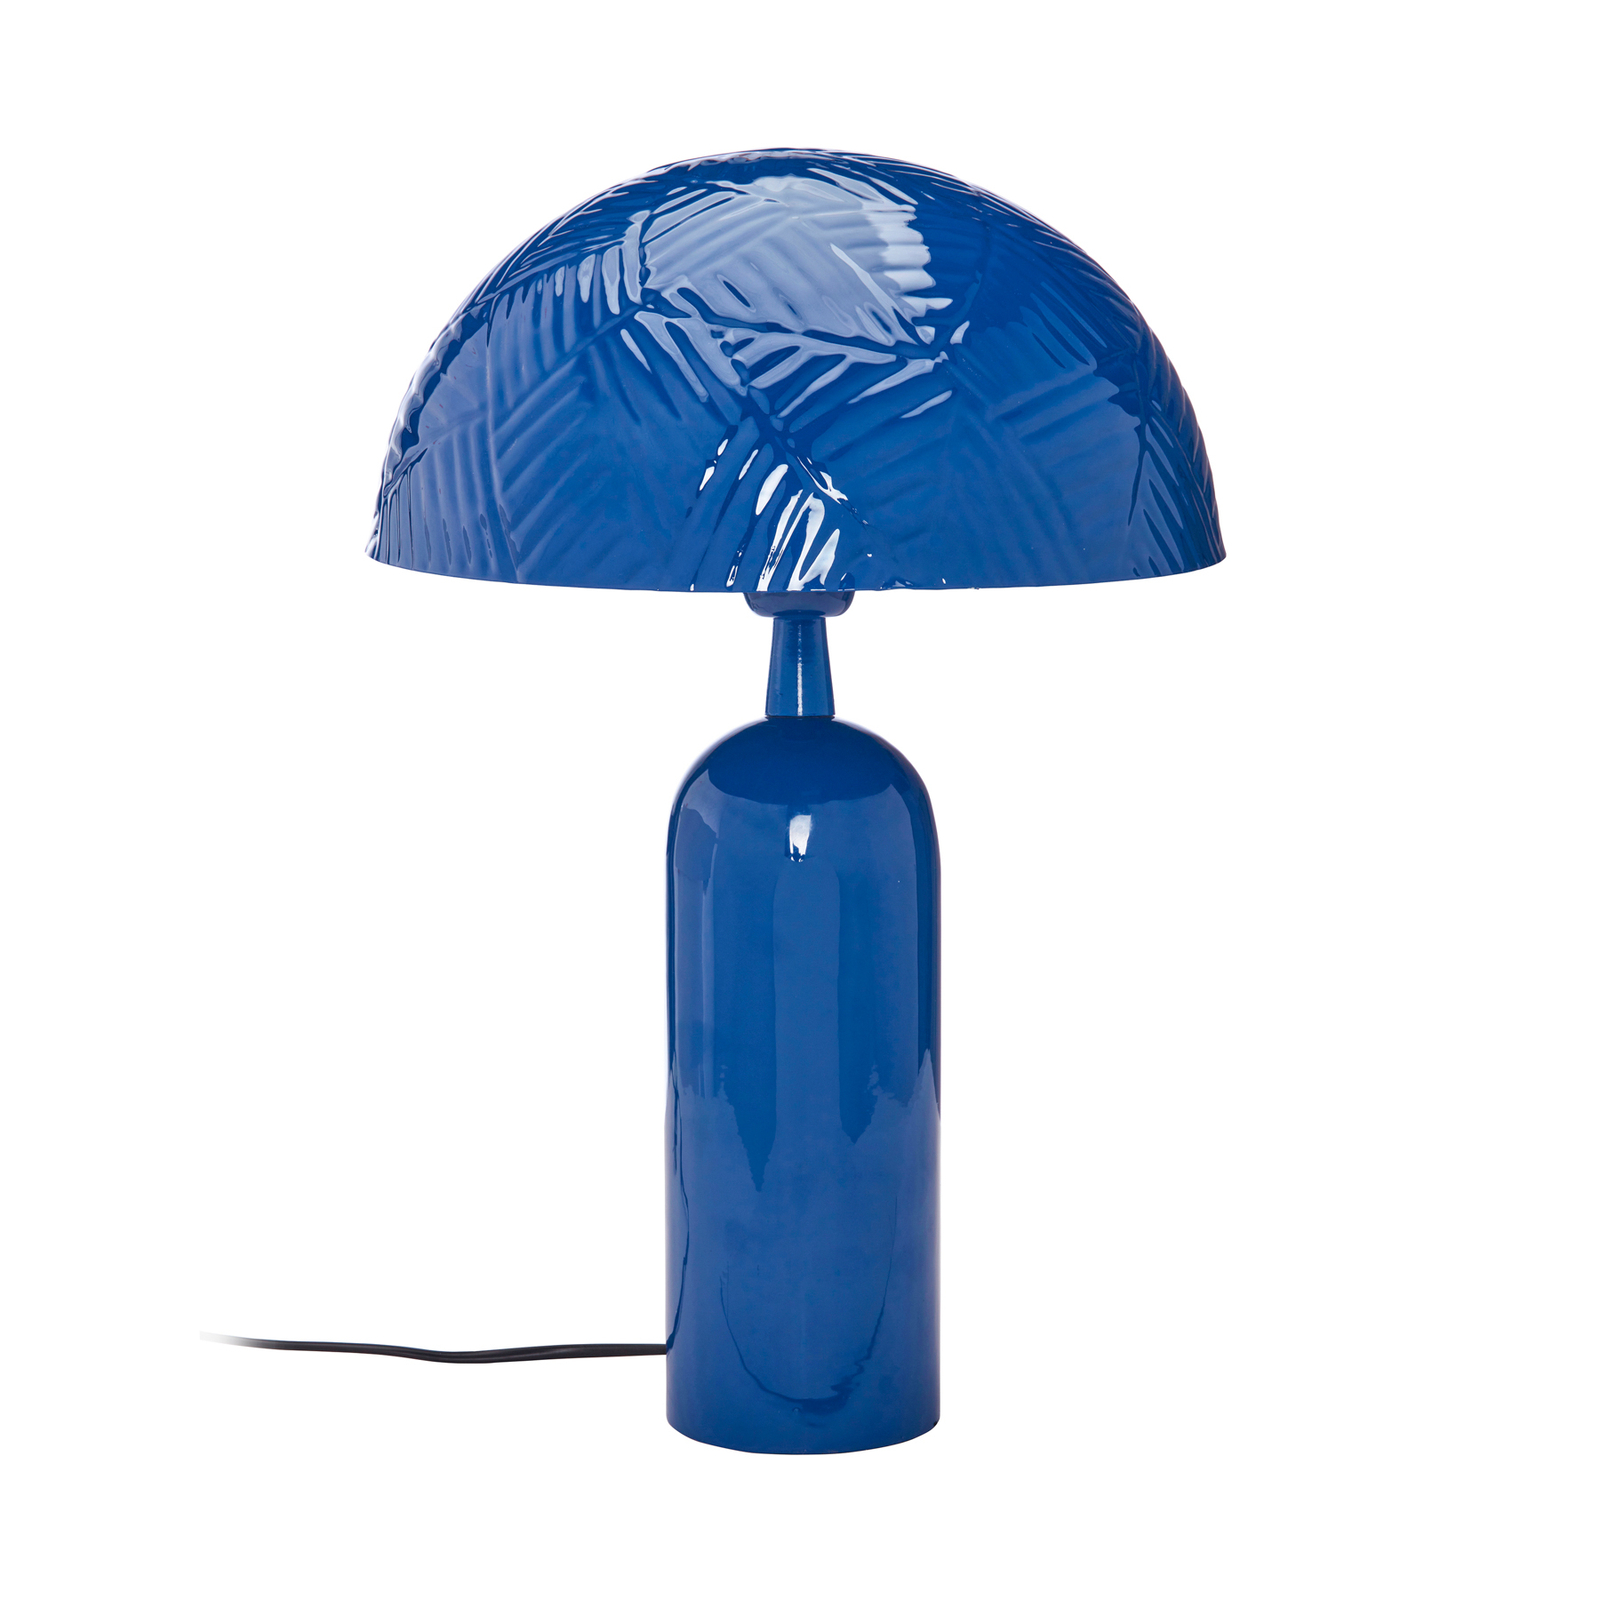 PR Home Carter table lamp made of metal, blue